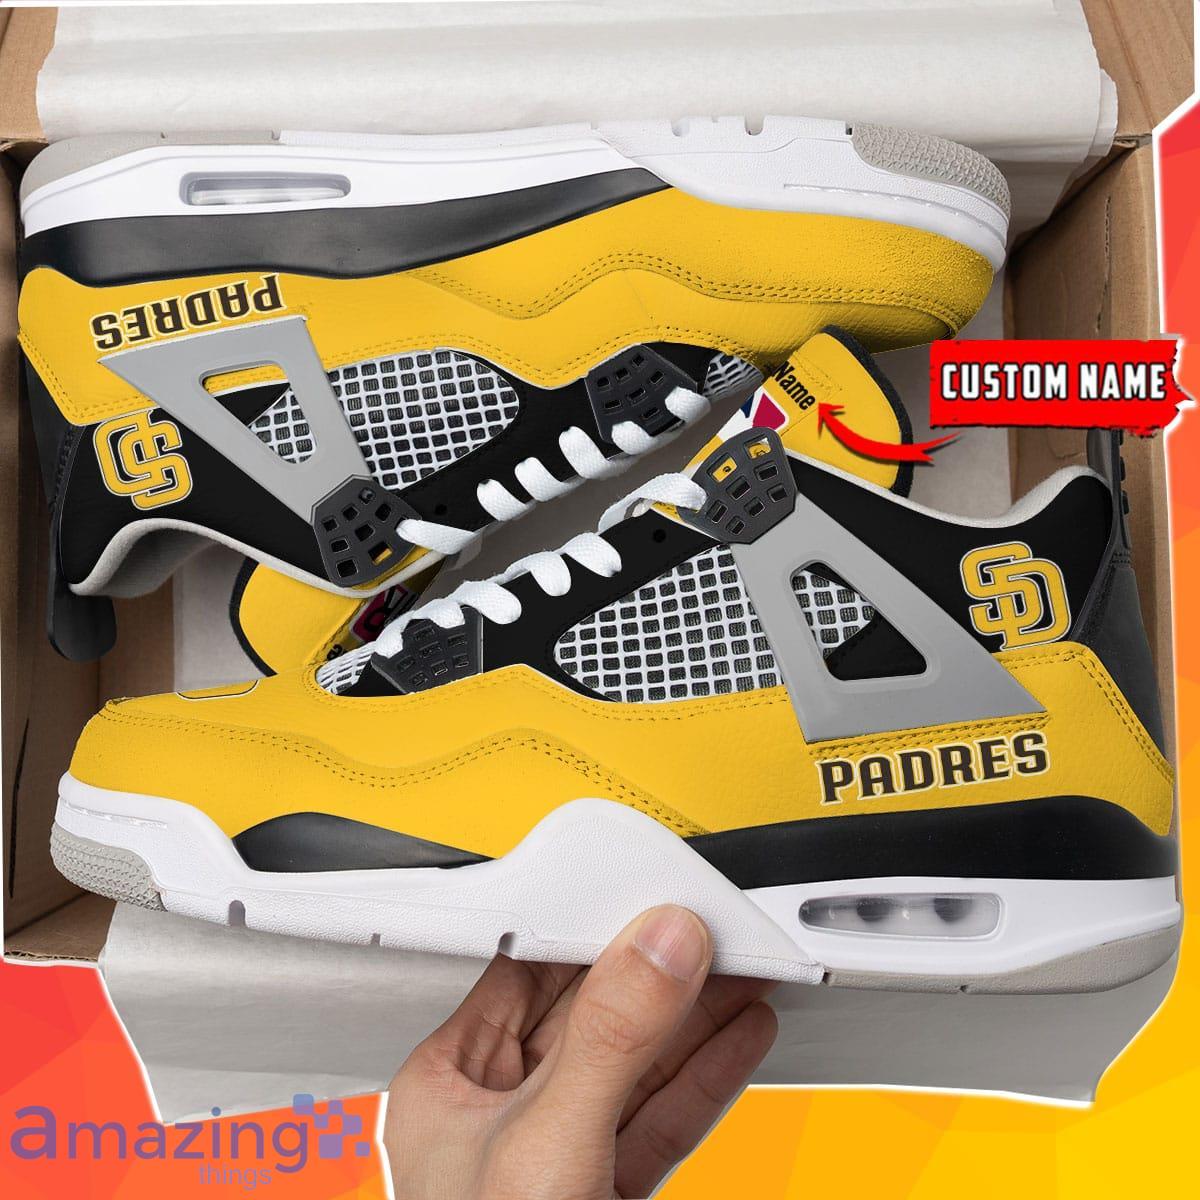 San Diego Padres Personalized Air Jordan 4 Sneakers Best Gift For Men And Women Product Photo 1